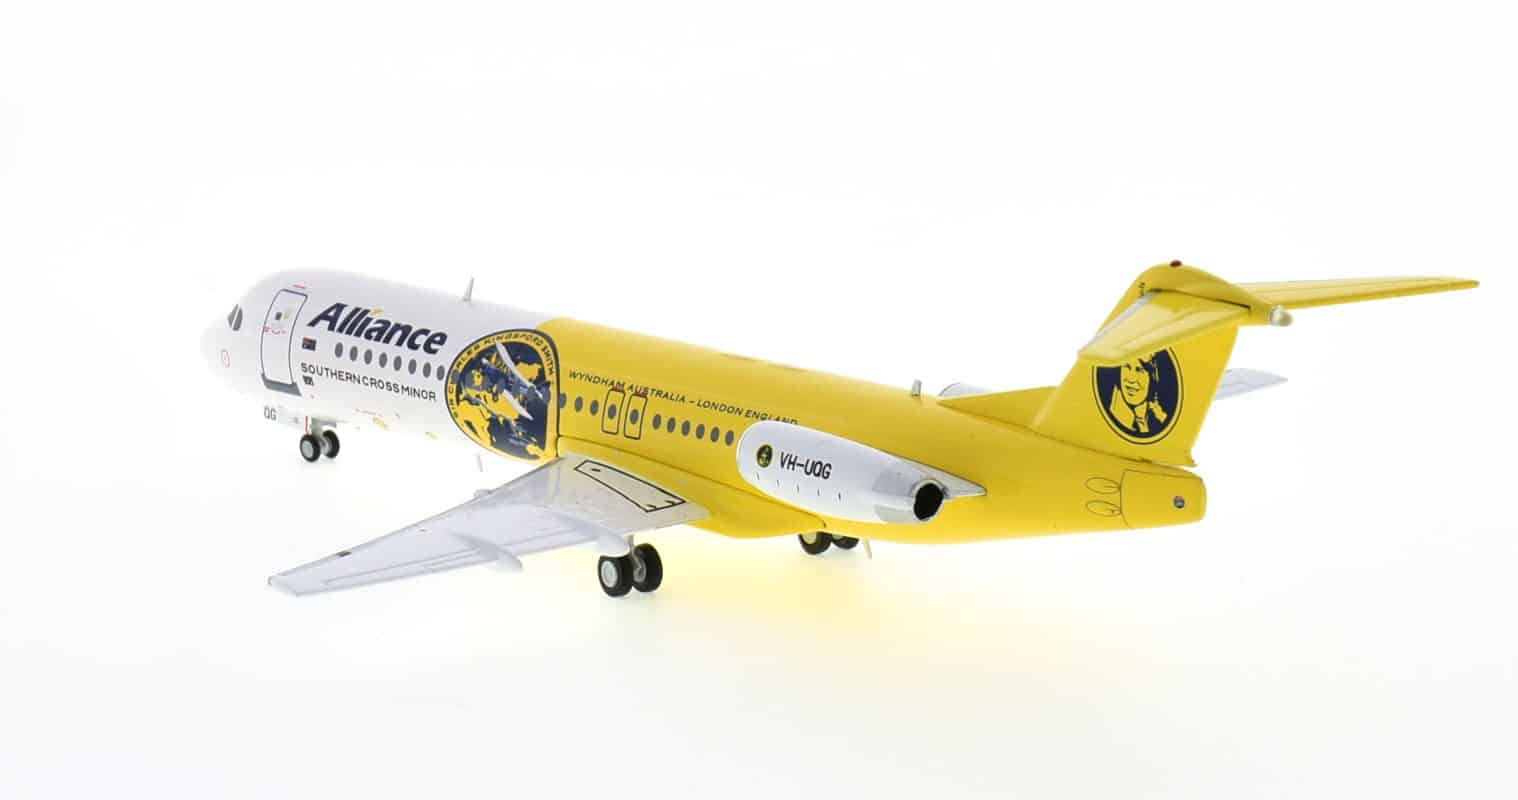 Rear view of Gemini Jets G2UTY987 - 1/200 scale diecast model of the Fokker 100, registration VH-UQG in Alliance Airlines 